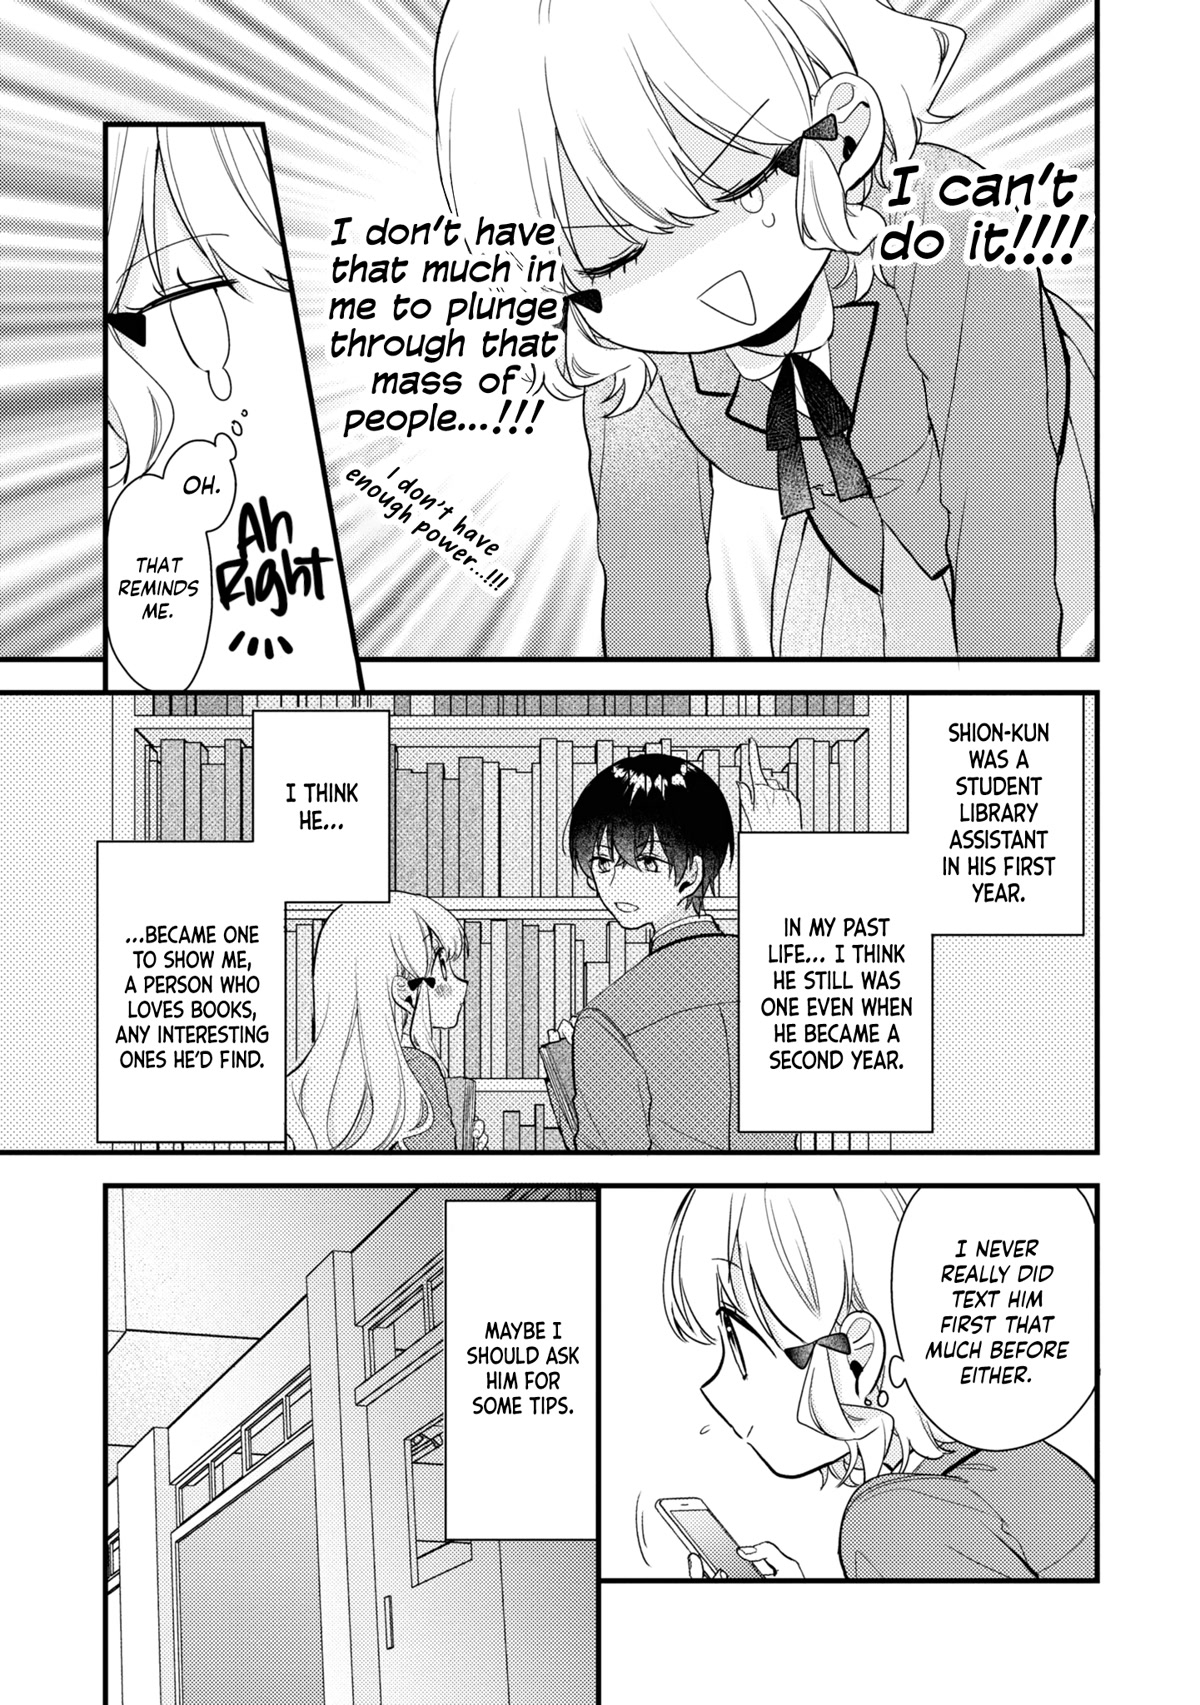 I Have A Second Chance At Life, So I’Ll Pamper My Yandere Boyfriend For A Happy Ending!! Chapter 3 #5